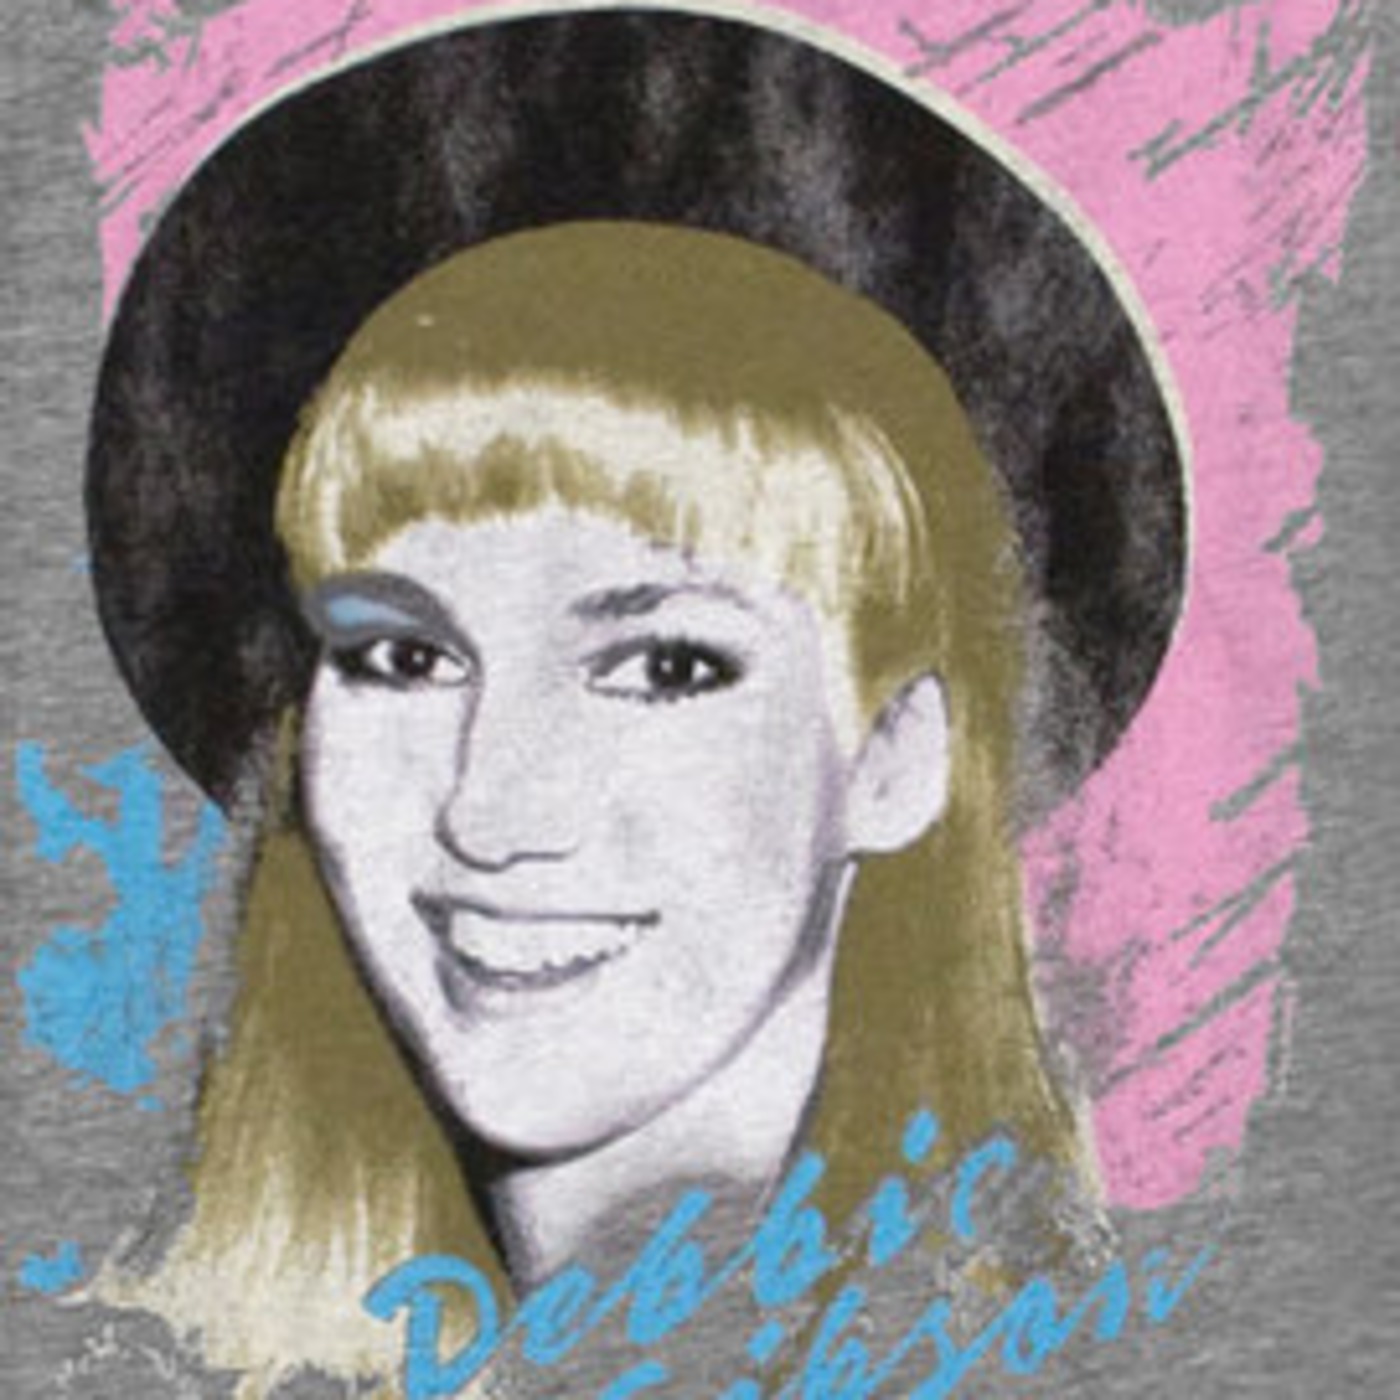 (25) The Pope Show & Debbie Gibson